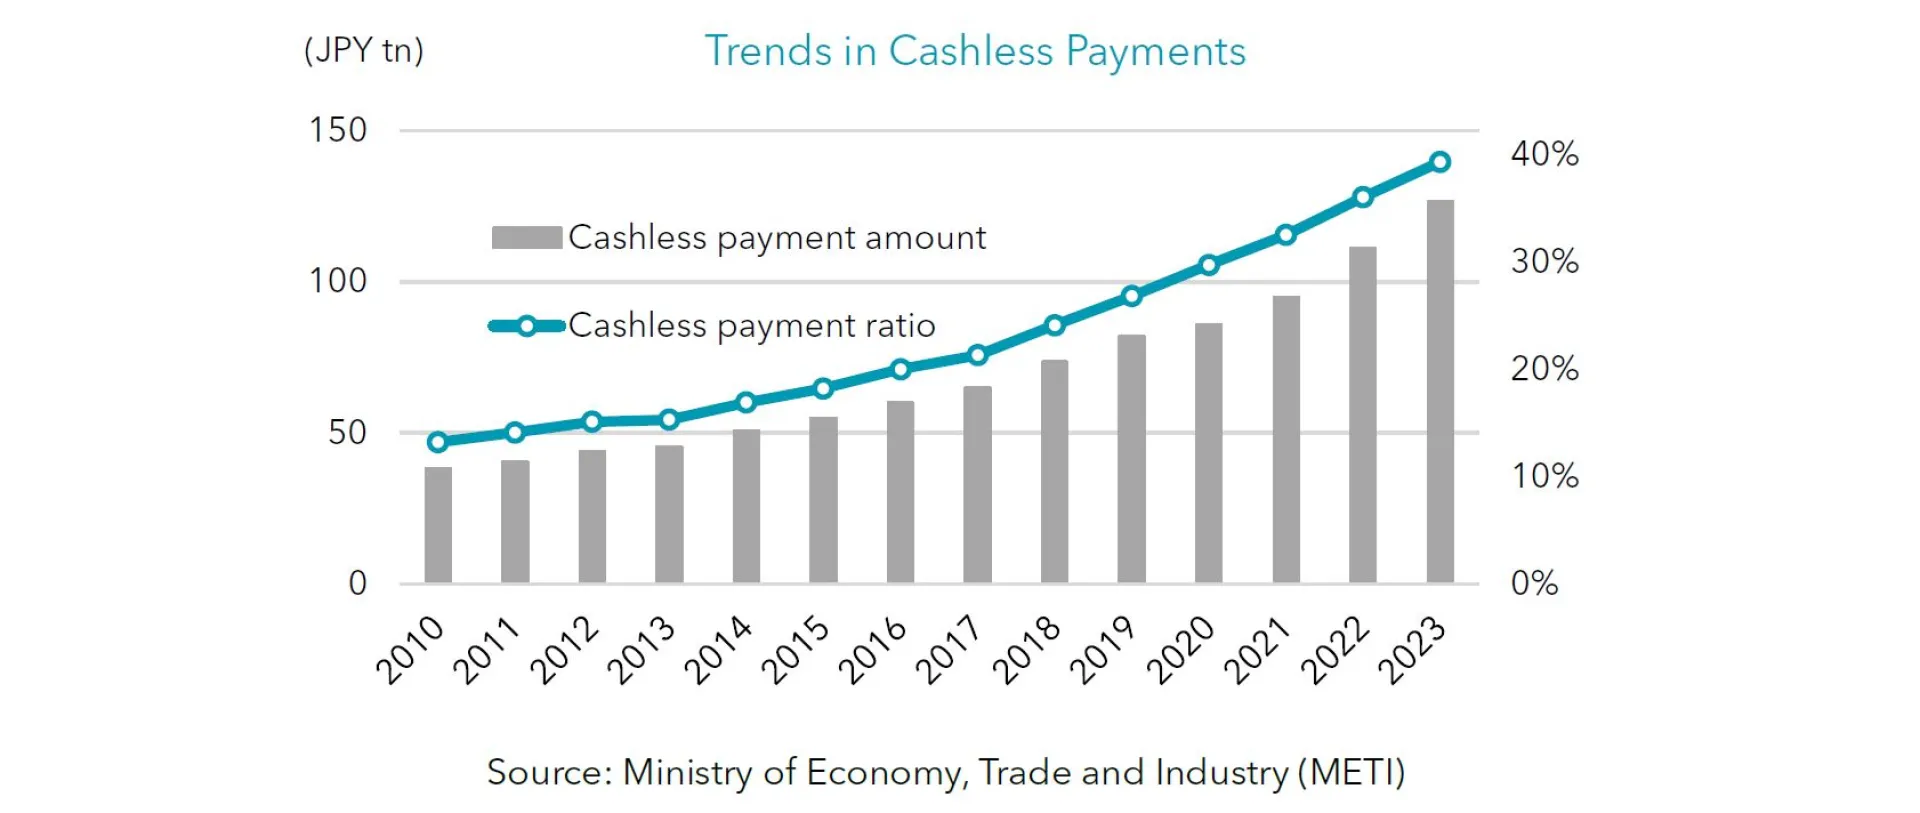 Trends in Cashless Payments